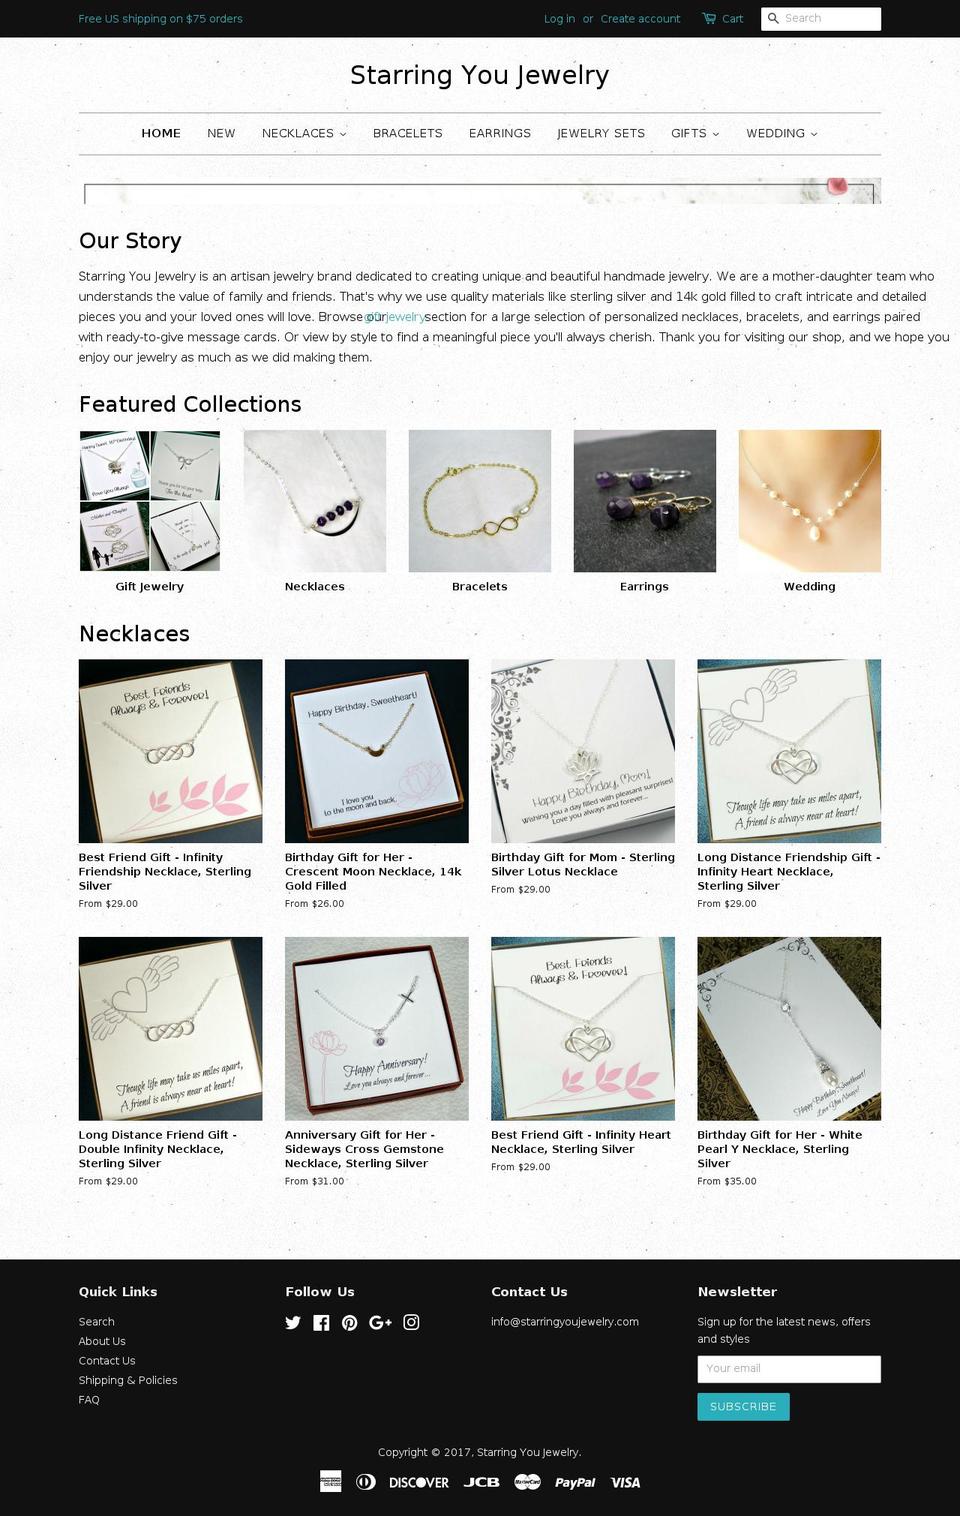 Kalles Shopify theme site example starringyoujewelry.com